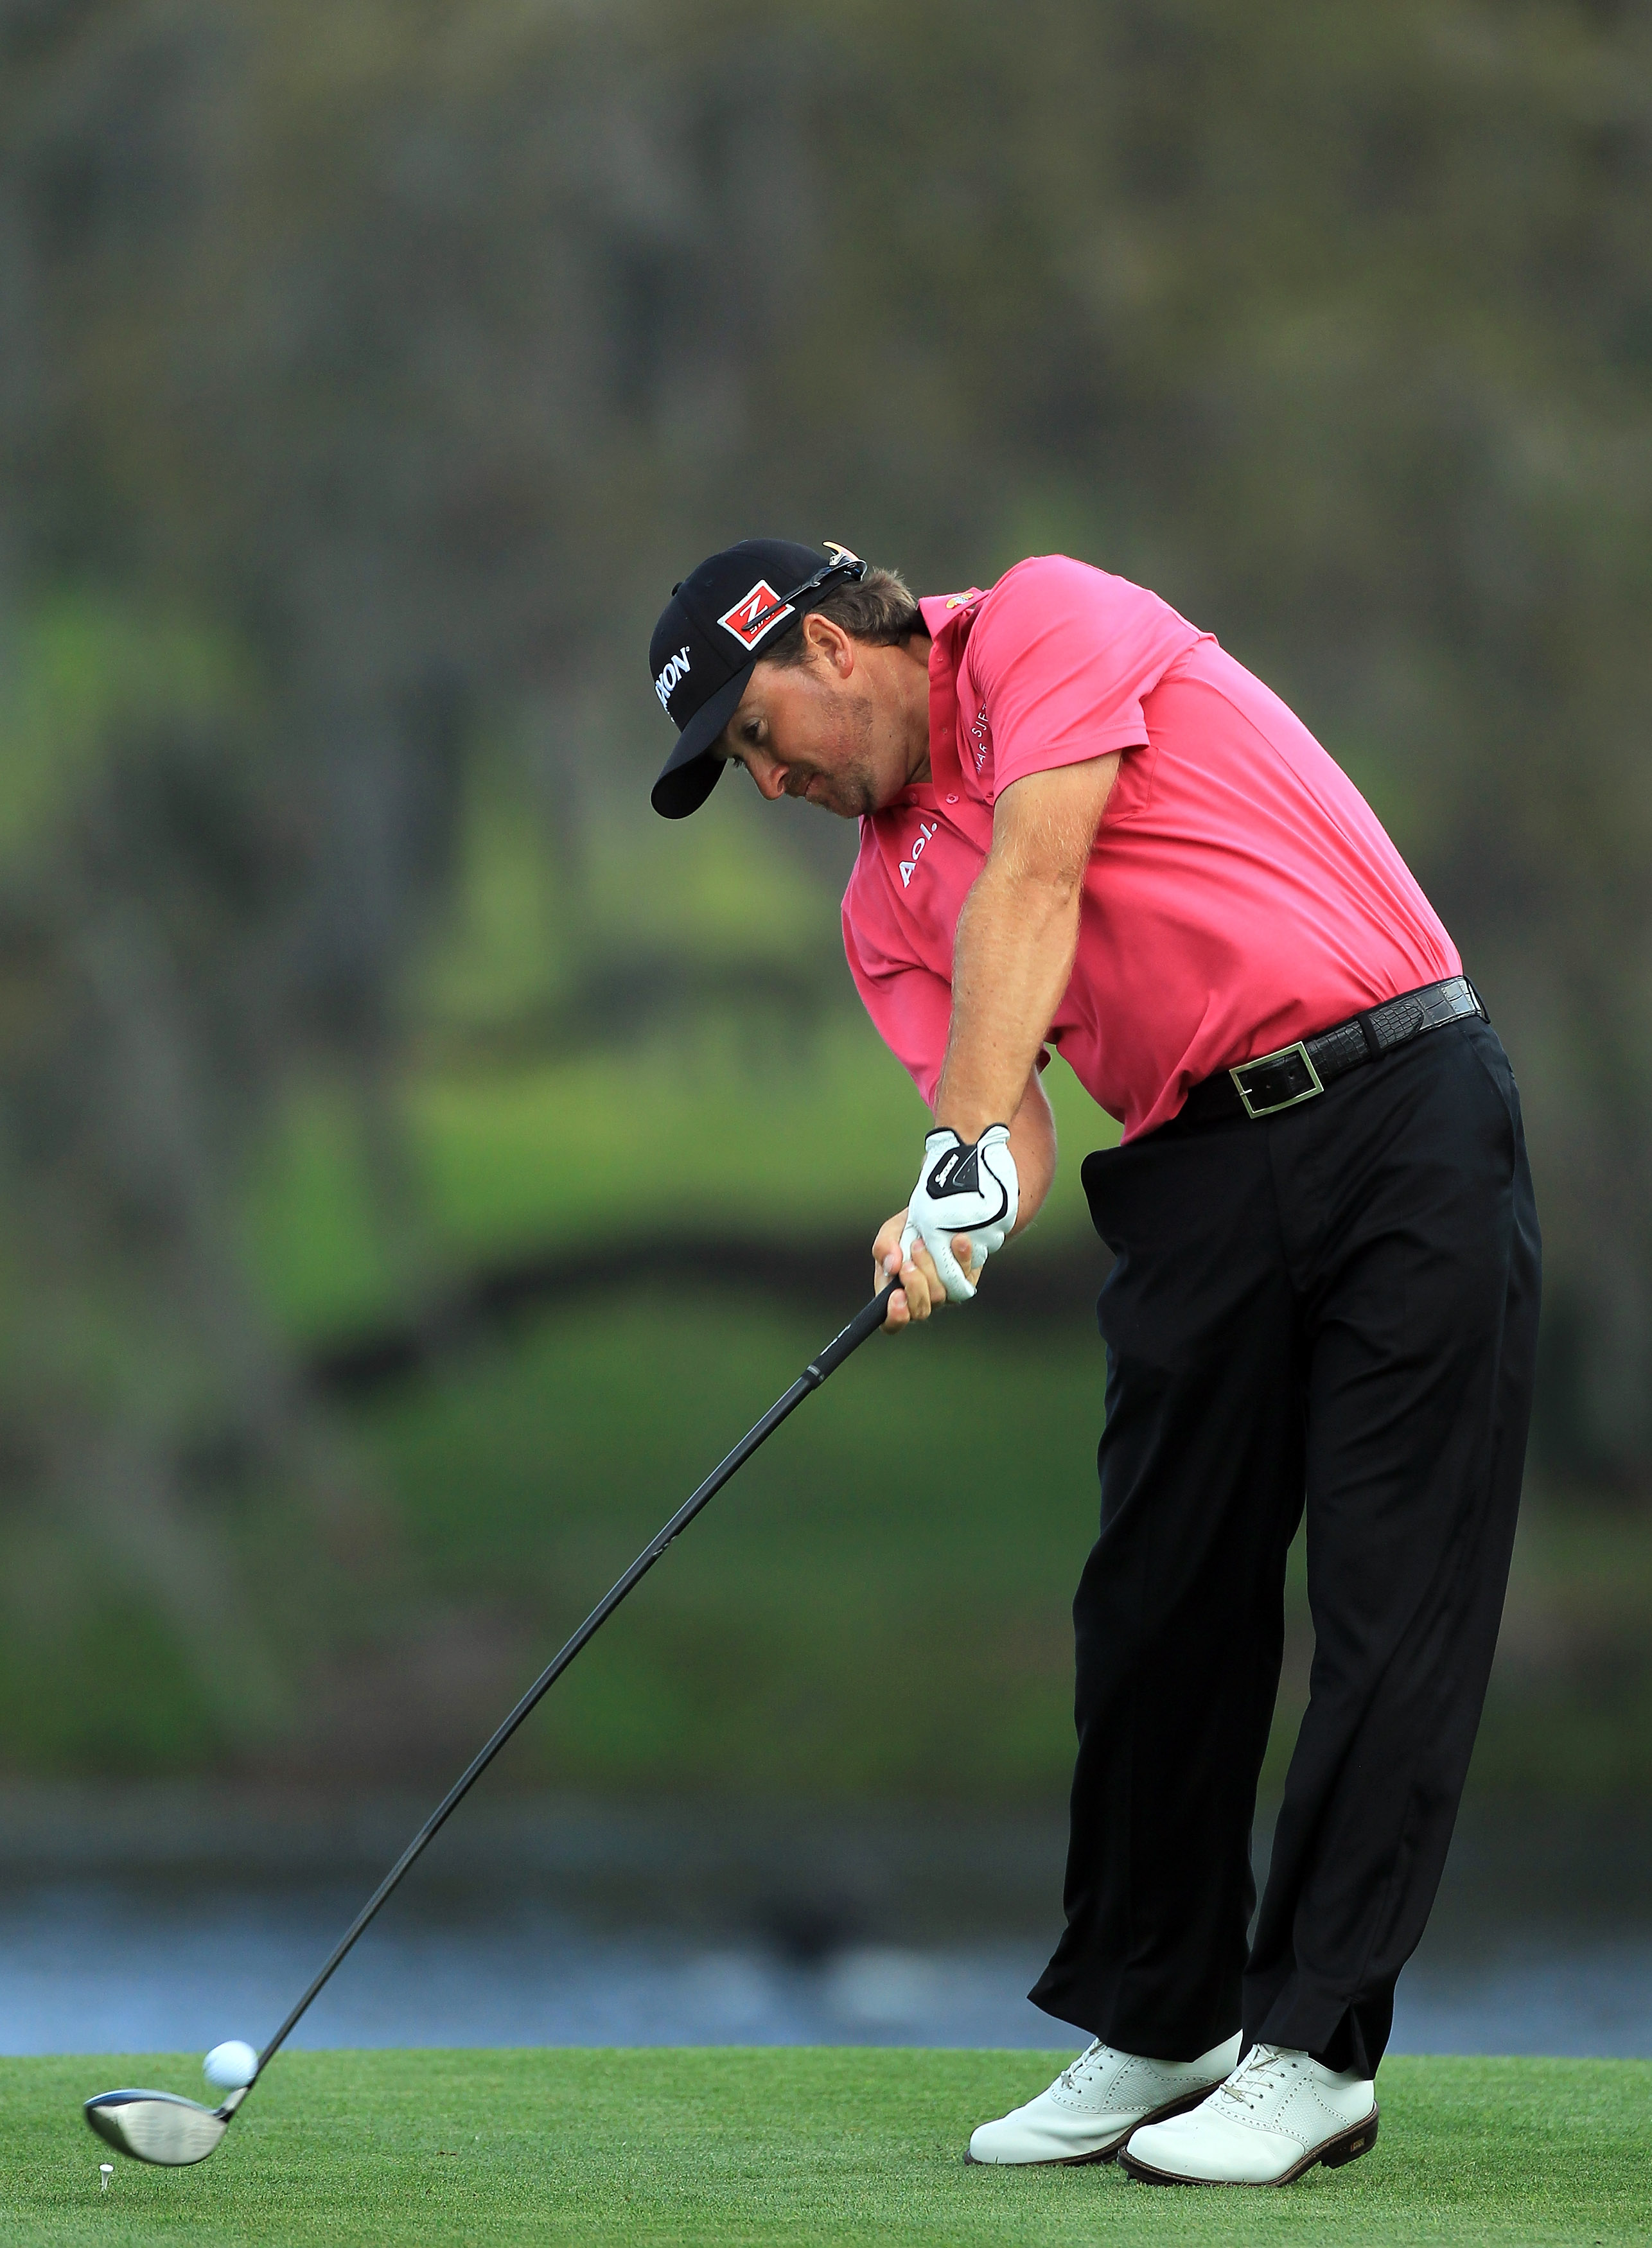 ORLANDO, FL - MARCH 24:  Graeme McDowell of Northern Ireland drives from the 16th tee during the first round of the 2011 Arnold Palmer Invitational presented by Mastercard at the Bay Hill Lodge and Country Club on March 24, 2011 in Orlando, Florida.  (Pho